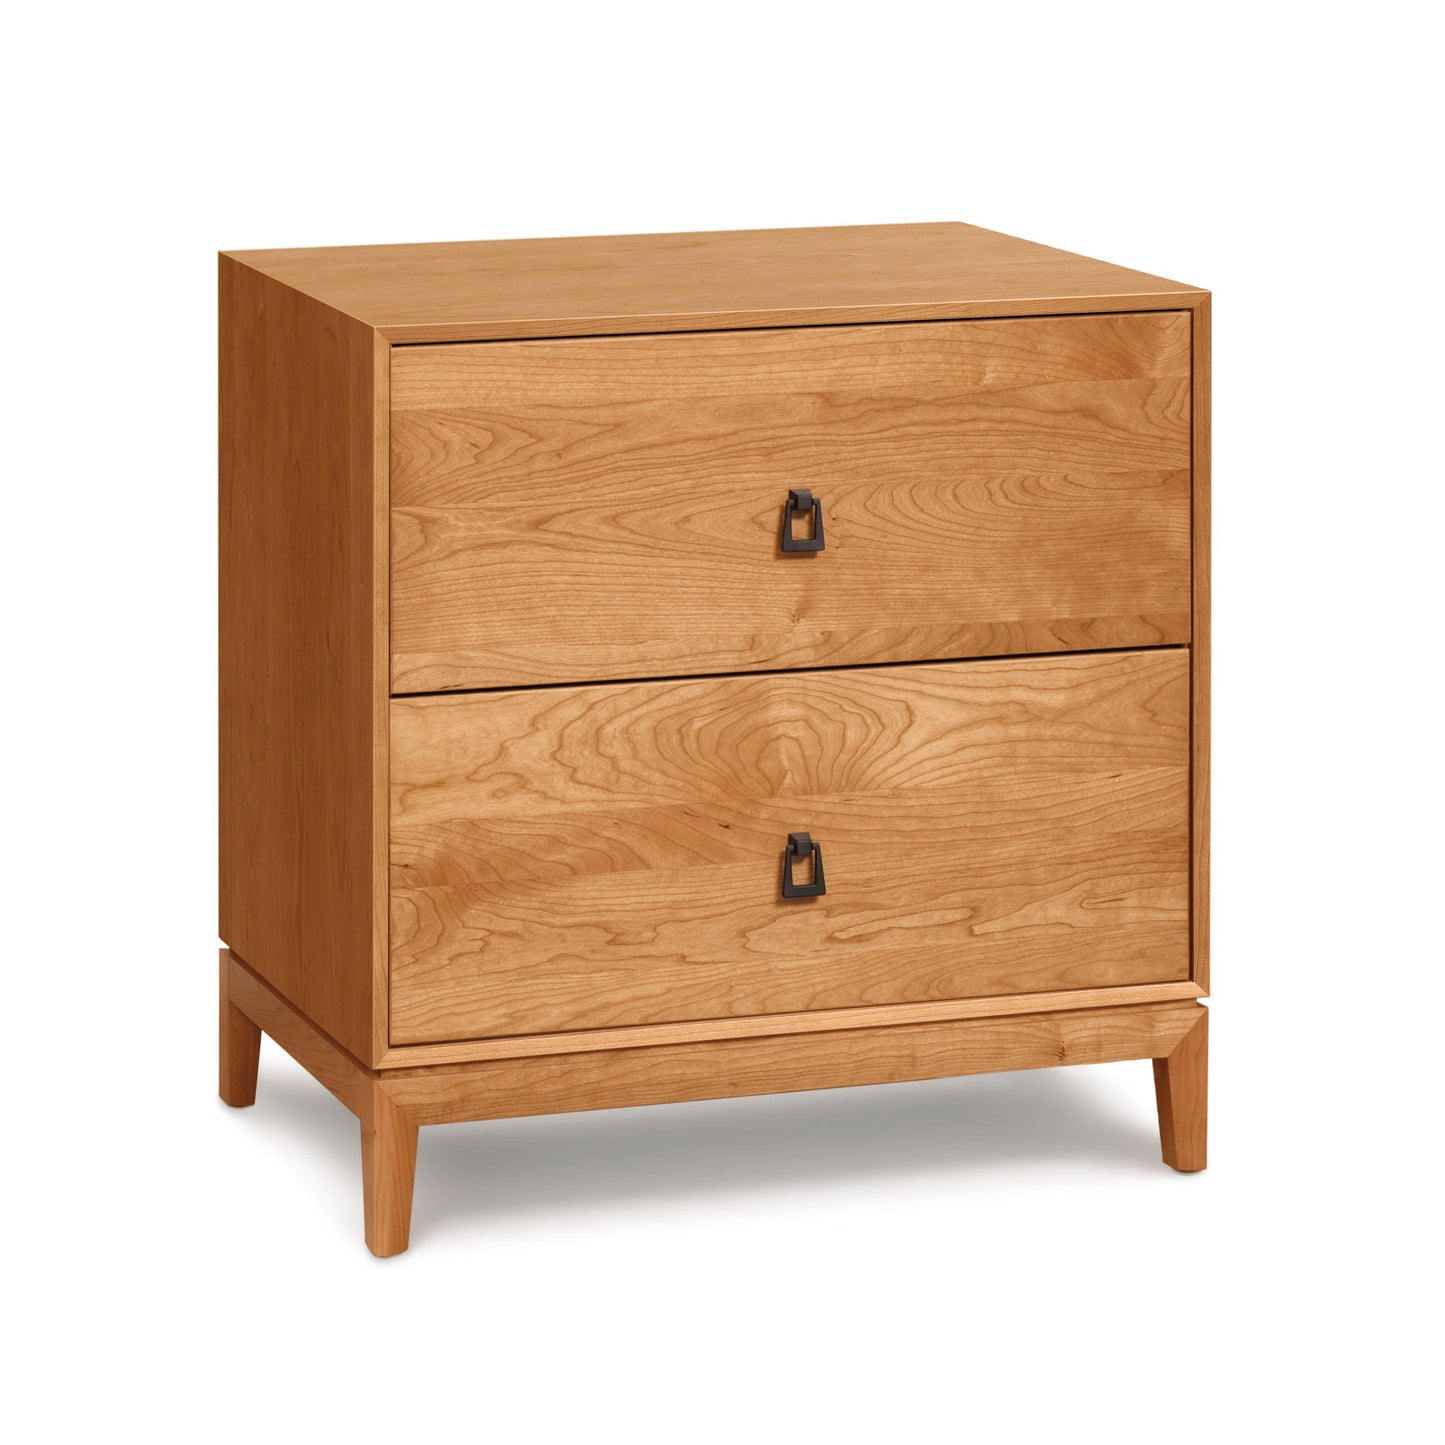 A black Mansfield 2-Drawer Nightstand with two drawers, featuring mitered frame and black bronze ring pulls from Copeland Furniture.